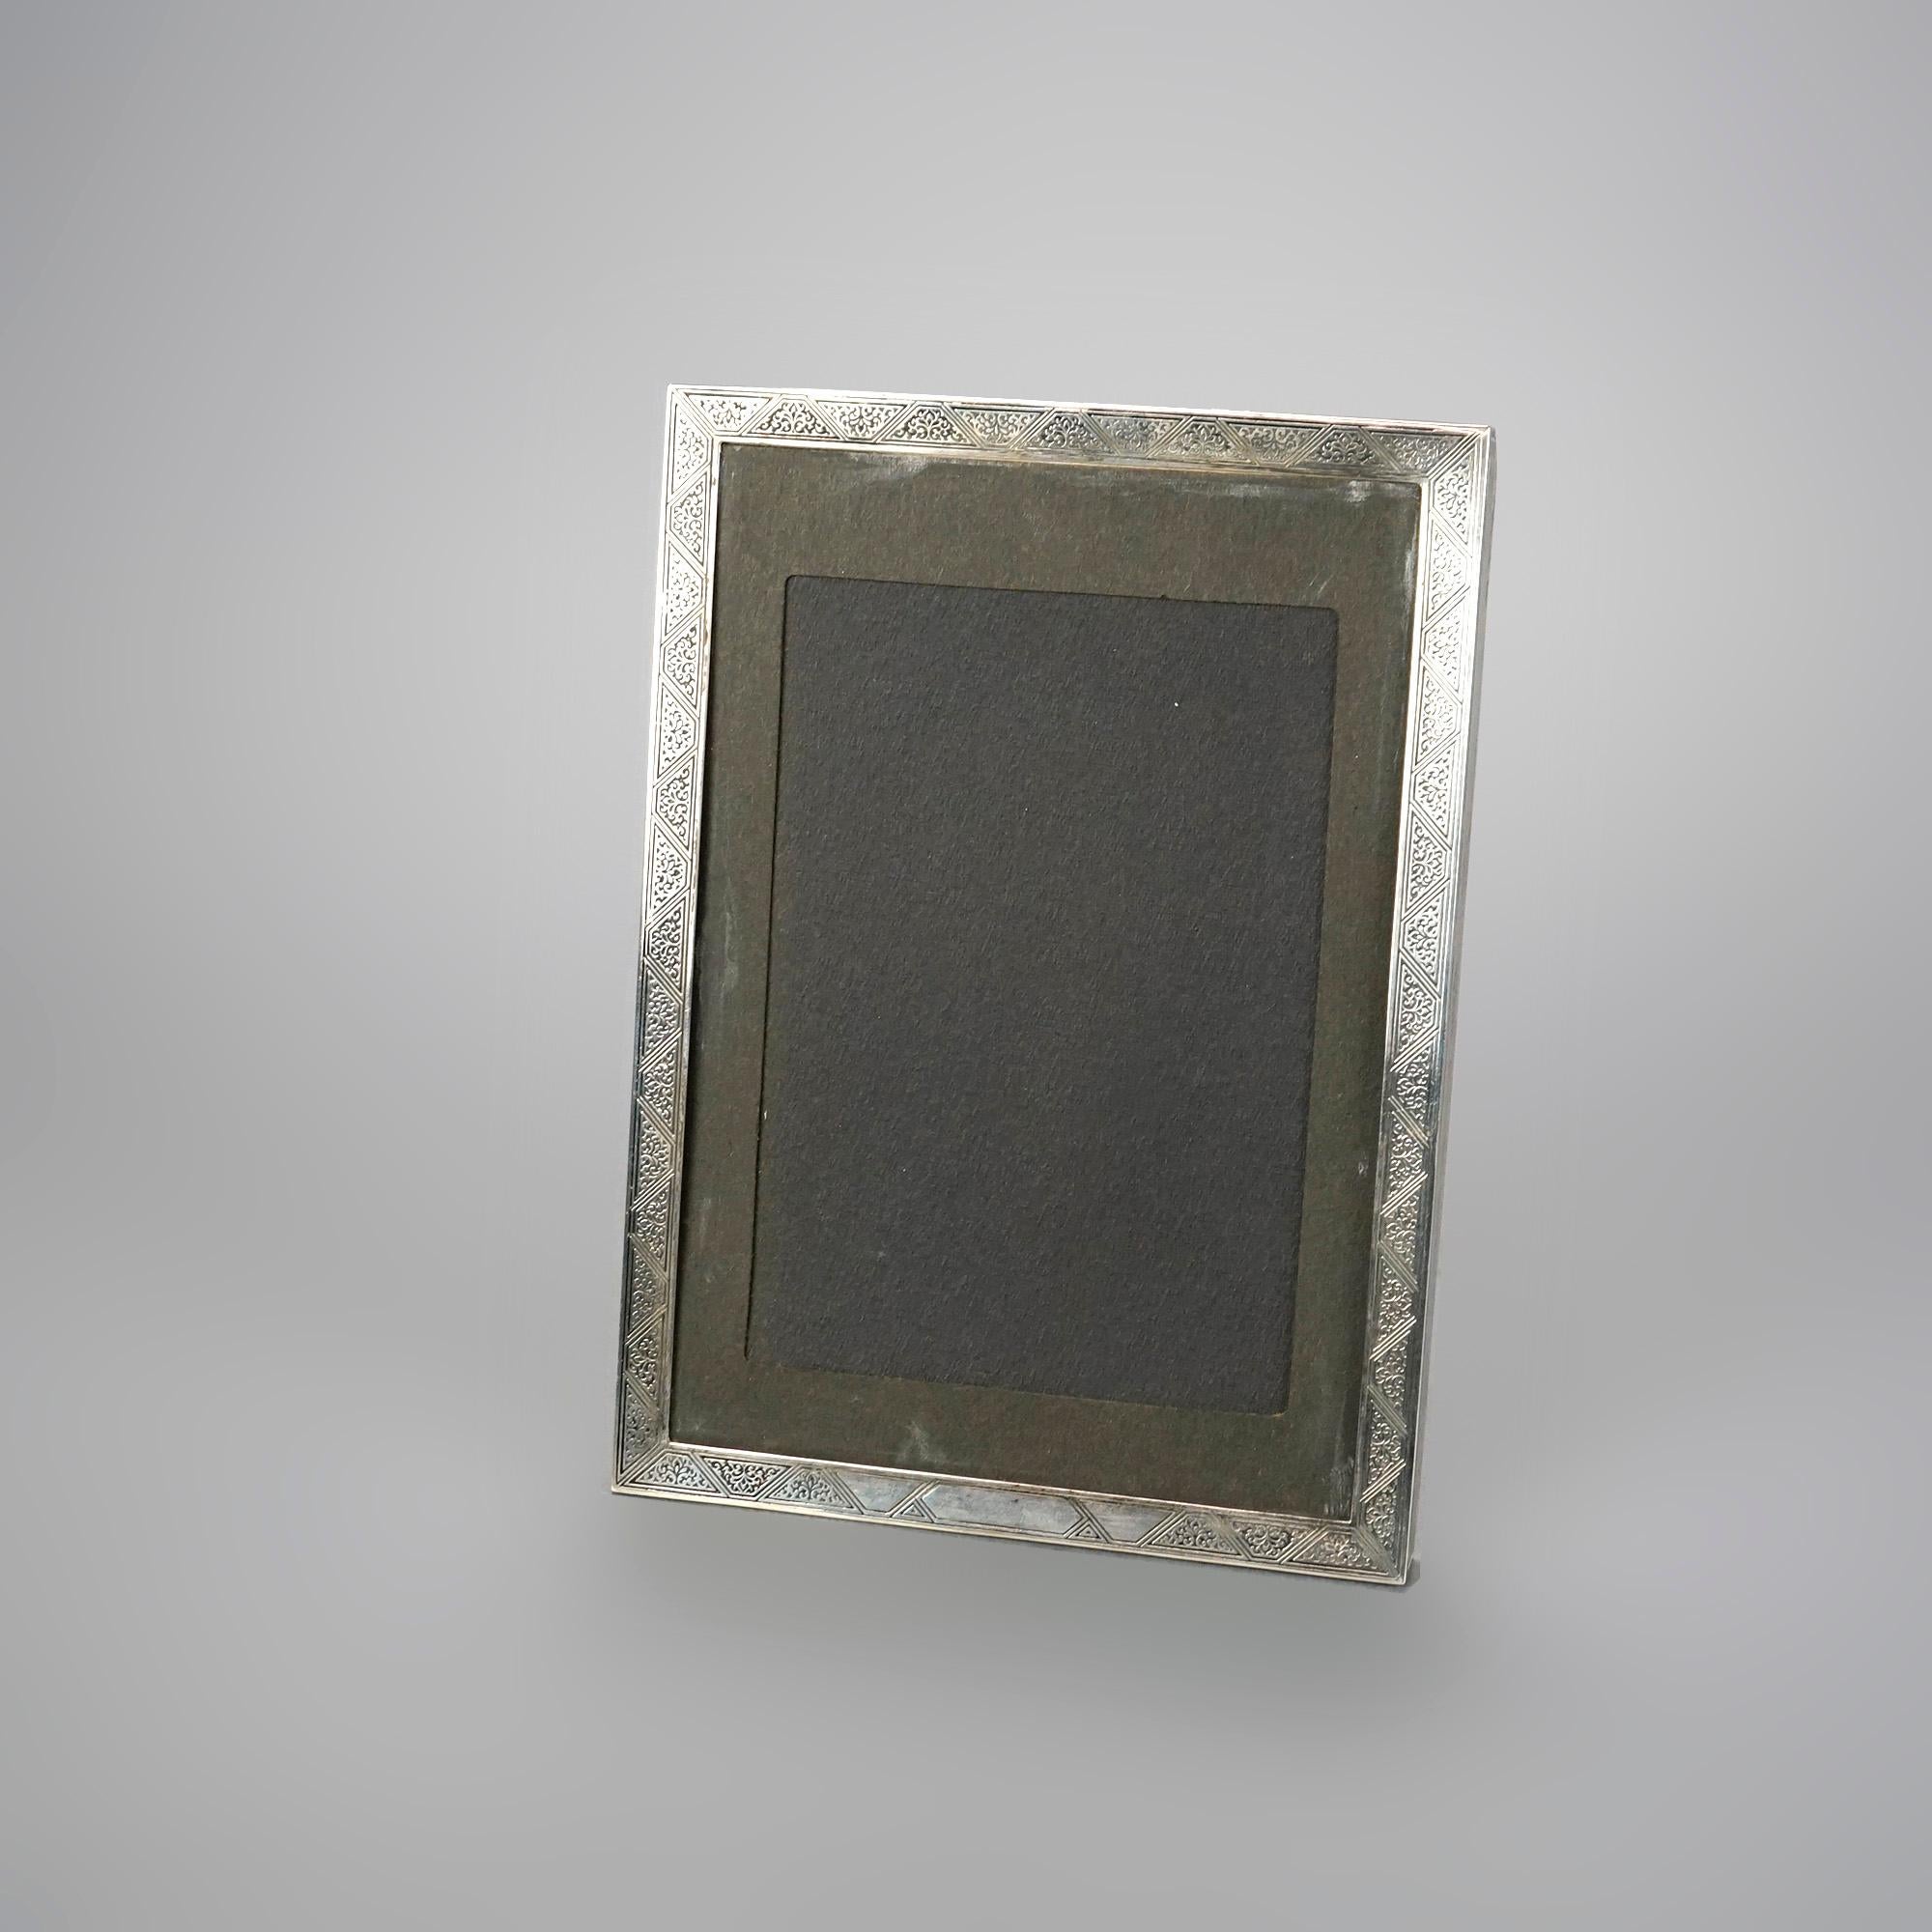 An antique picture frame by Tiffany Studios offers sterling silver construction with embossed geometric design, maker signed, c1900

Measures- 9.25''H x 6.5''W x .5''D.